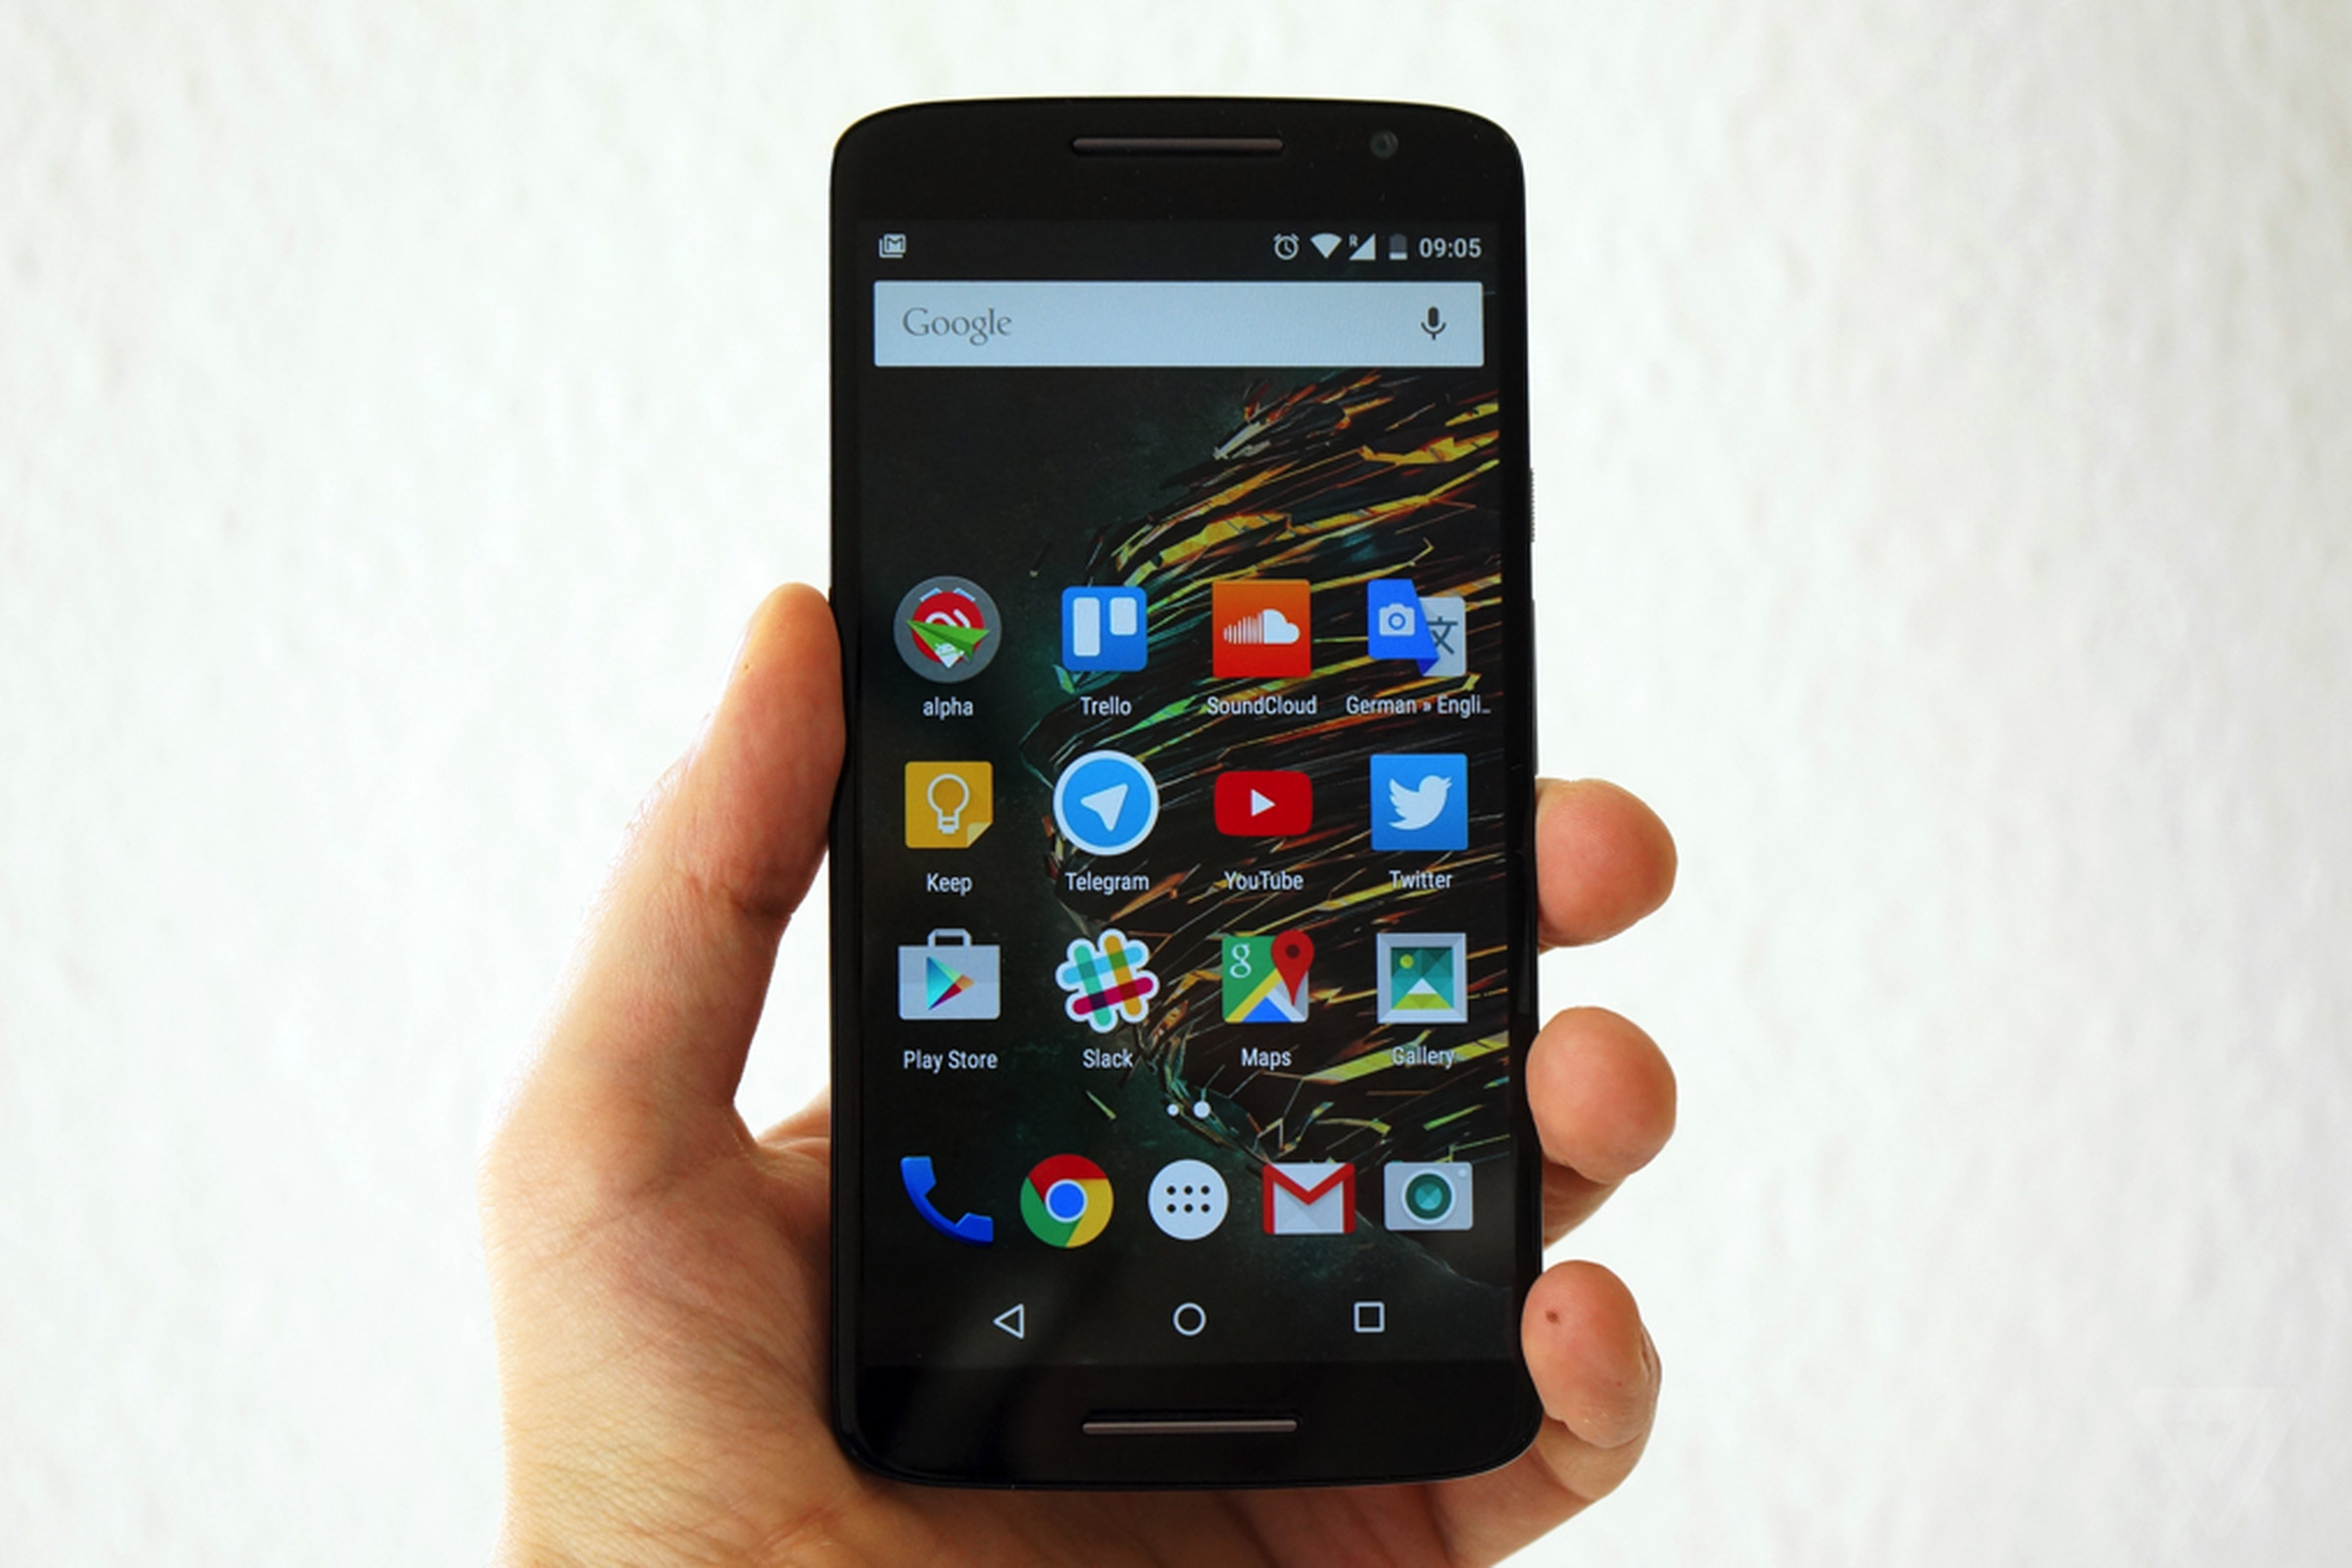 Moto X Play review - The Verge